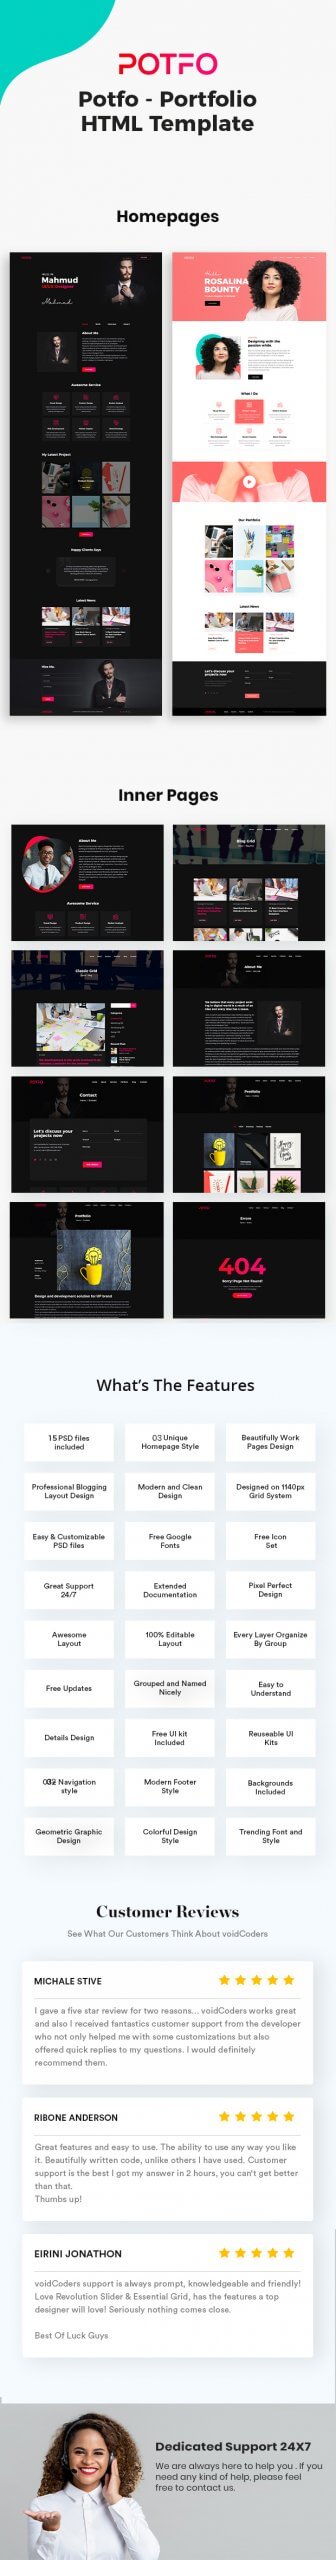 Potfo - Personal Portfolio HTML5 Template with RTL support - 1